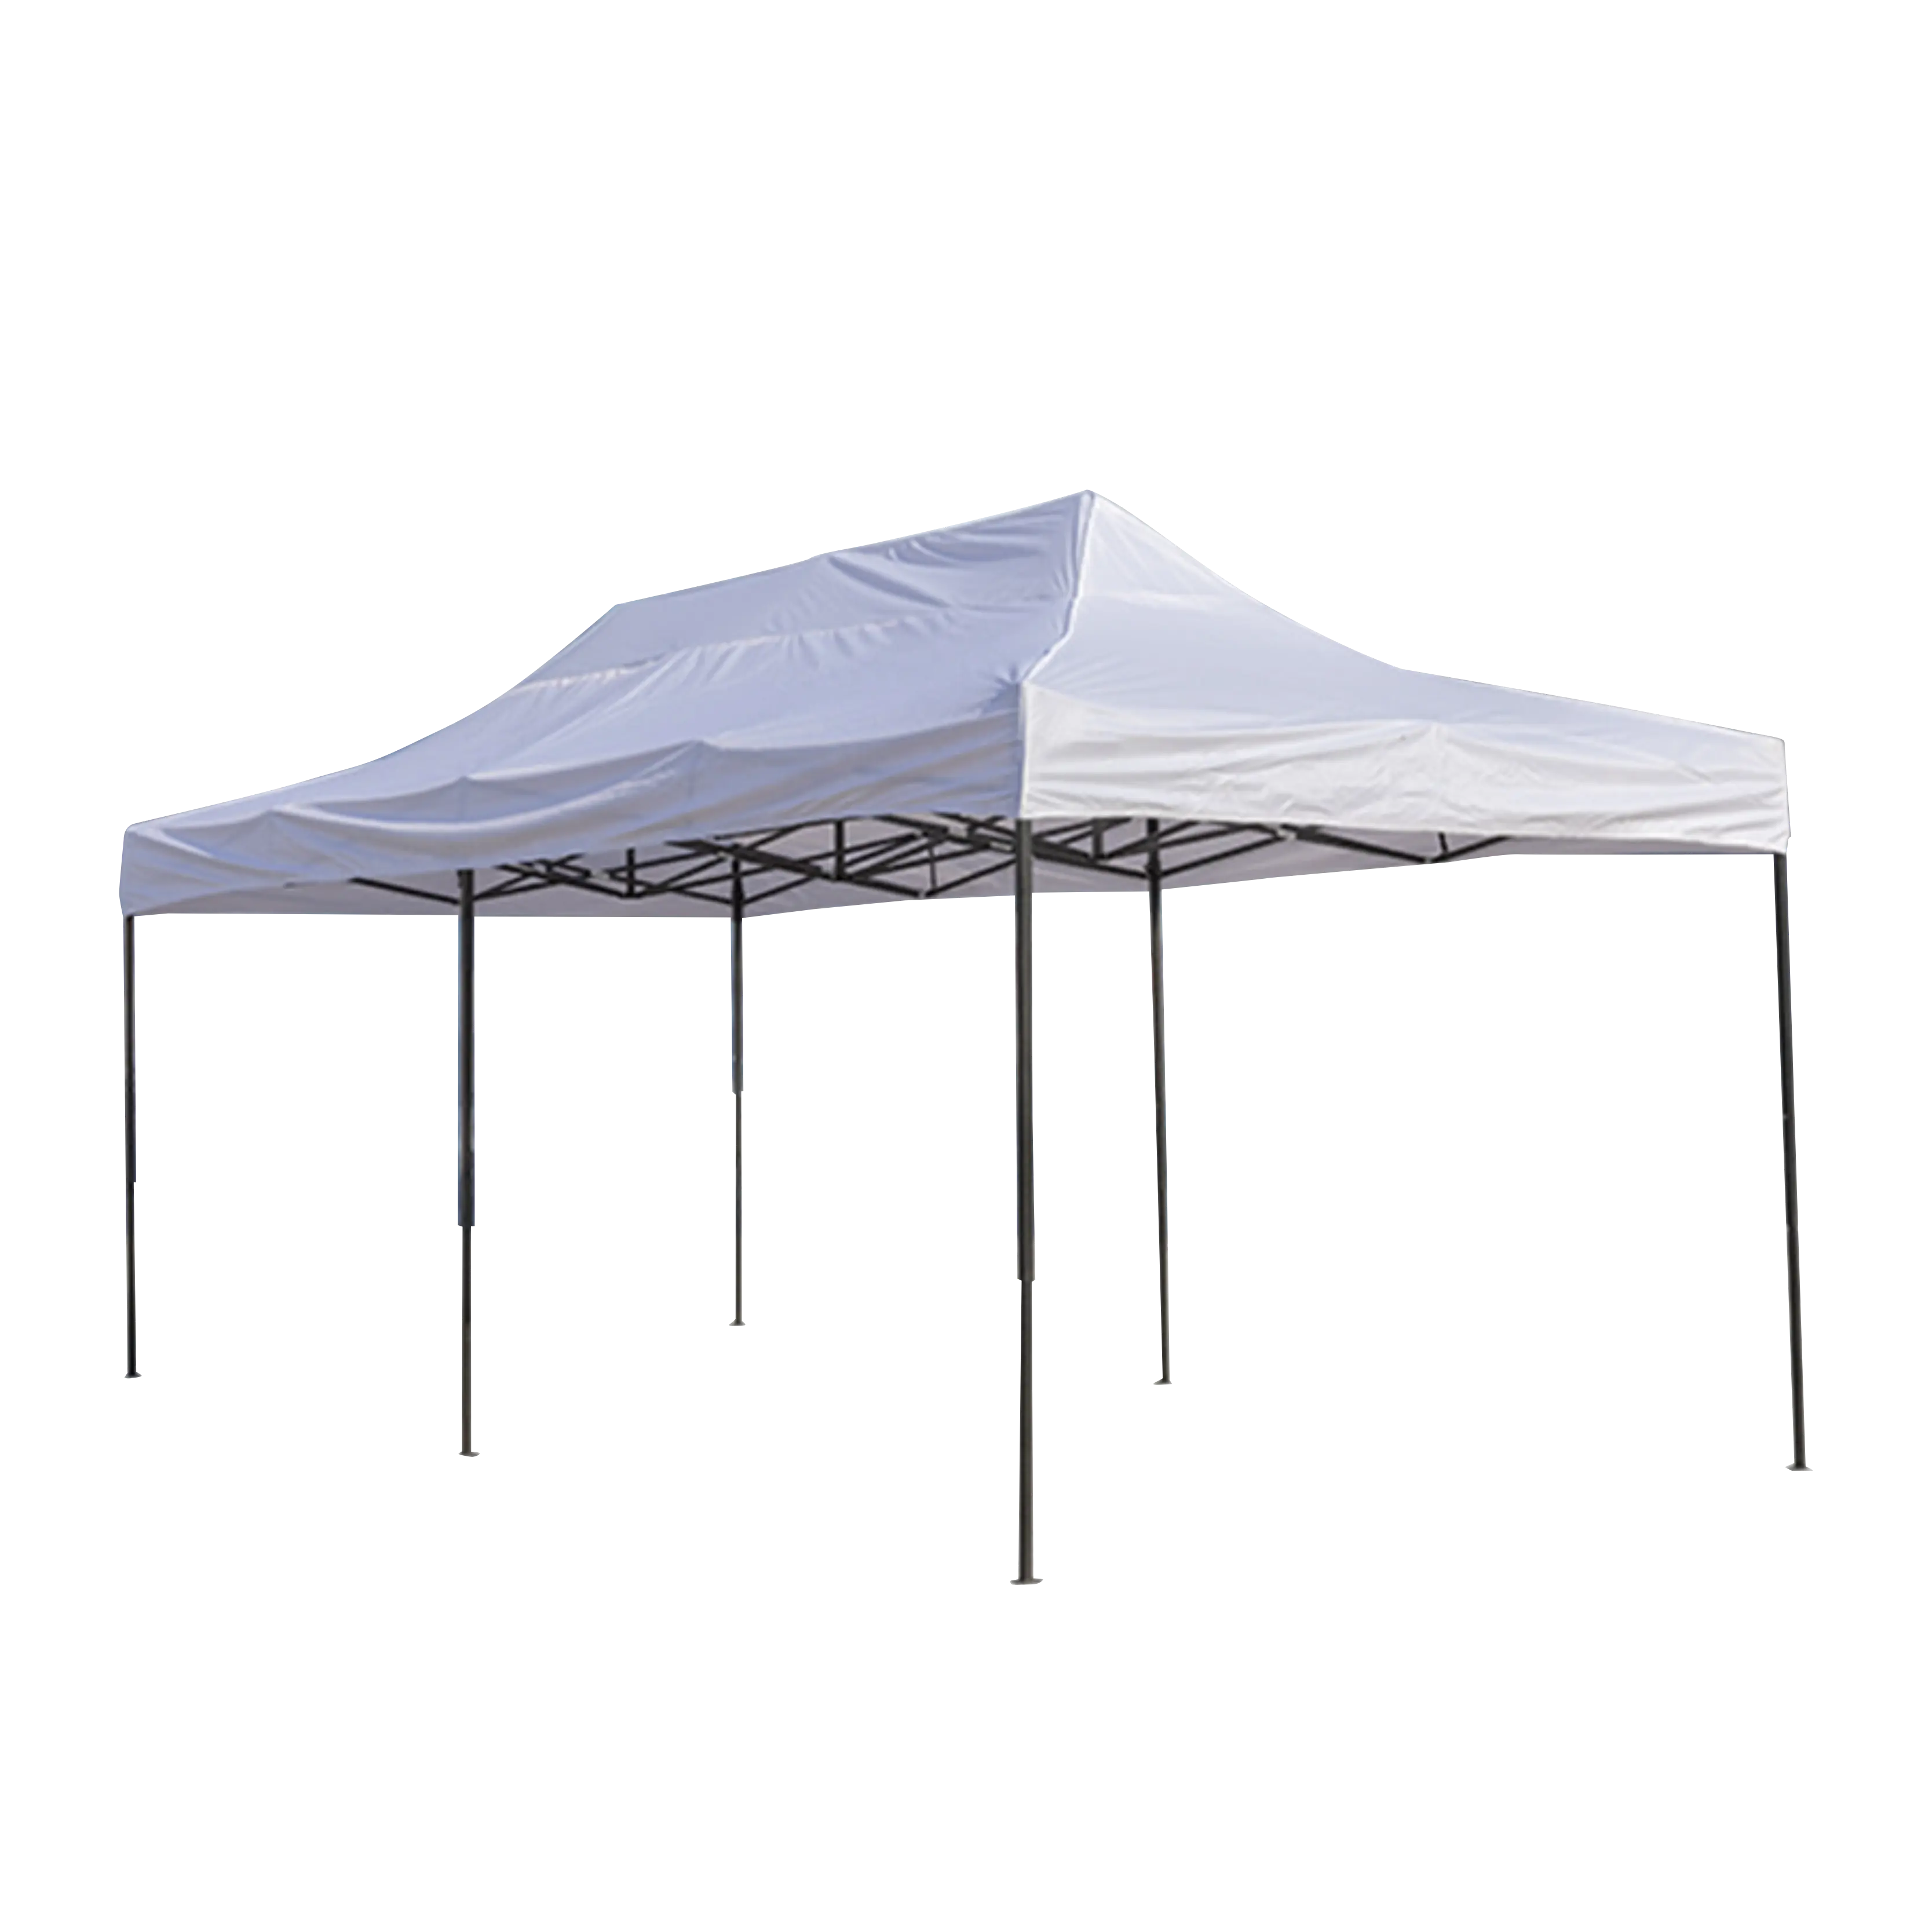 High Quality Advertising Logo Outdoor Trade Show Tents Exhibition Event Marquee Gazebos 3X6 Tente Pop Up 10X20 Canopy Tent